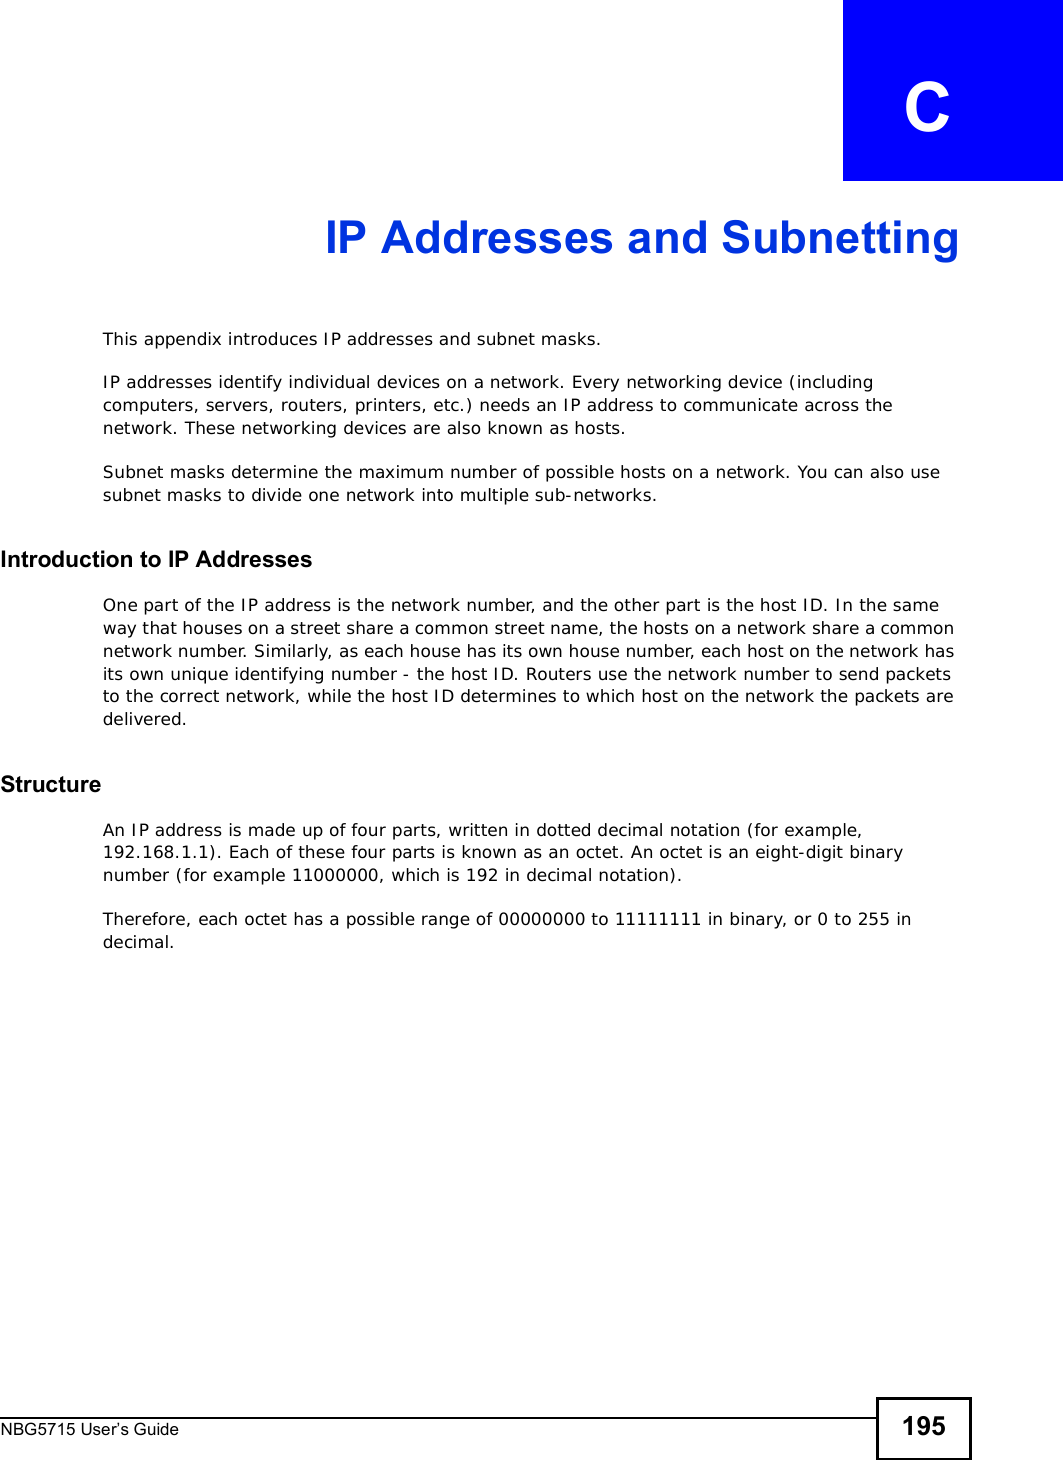 NBG5715 User’s Guide 195APPENDIX   CIP Addresses and SubnettingThis appendix introduces IP addresses and subnet masks. IP addresses identify individual devices on a network. Every networking device (including computers, servers, routers, printers, etc.) needs an IP address to communicate across the network. These networking devices are also known as hosts.Subnet masks determine the maximum number of possible hosts on a network. You can also use subnet masks to divide one network into multiple sub-networks.Introduction to IP AddressesOne part of the IP address is the network number, and the other part is the host ID. In the same way that houses on a street share a common street name, the hosts on a network share a common network number. Similarly, as each house has its own house number, each host on the network has its own unique identifying number - the host ID. Routers use the network number to send packets to the correct network, while the host ID determines to which host on the network the packets are delivered.StructureAn IP address is made up of four parts, written in dotted decimal notation (for example, 192.168.1.1). Each of these four parts is known as an octet. An octet is an eight-digit binary number (for example 11000000, which is 192 in decimal notation). Therefore, each octet has a possible range of 00000000 to 11111111 in binary, or 0 to 255 in decimal.